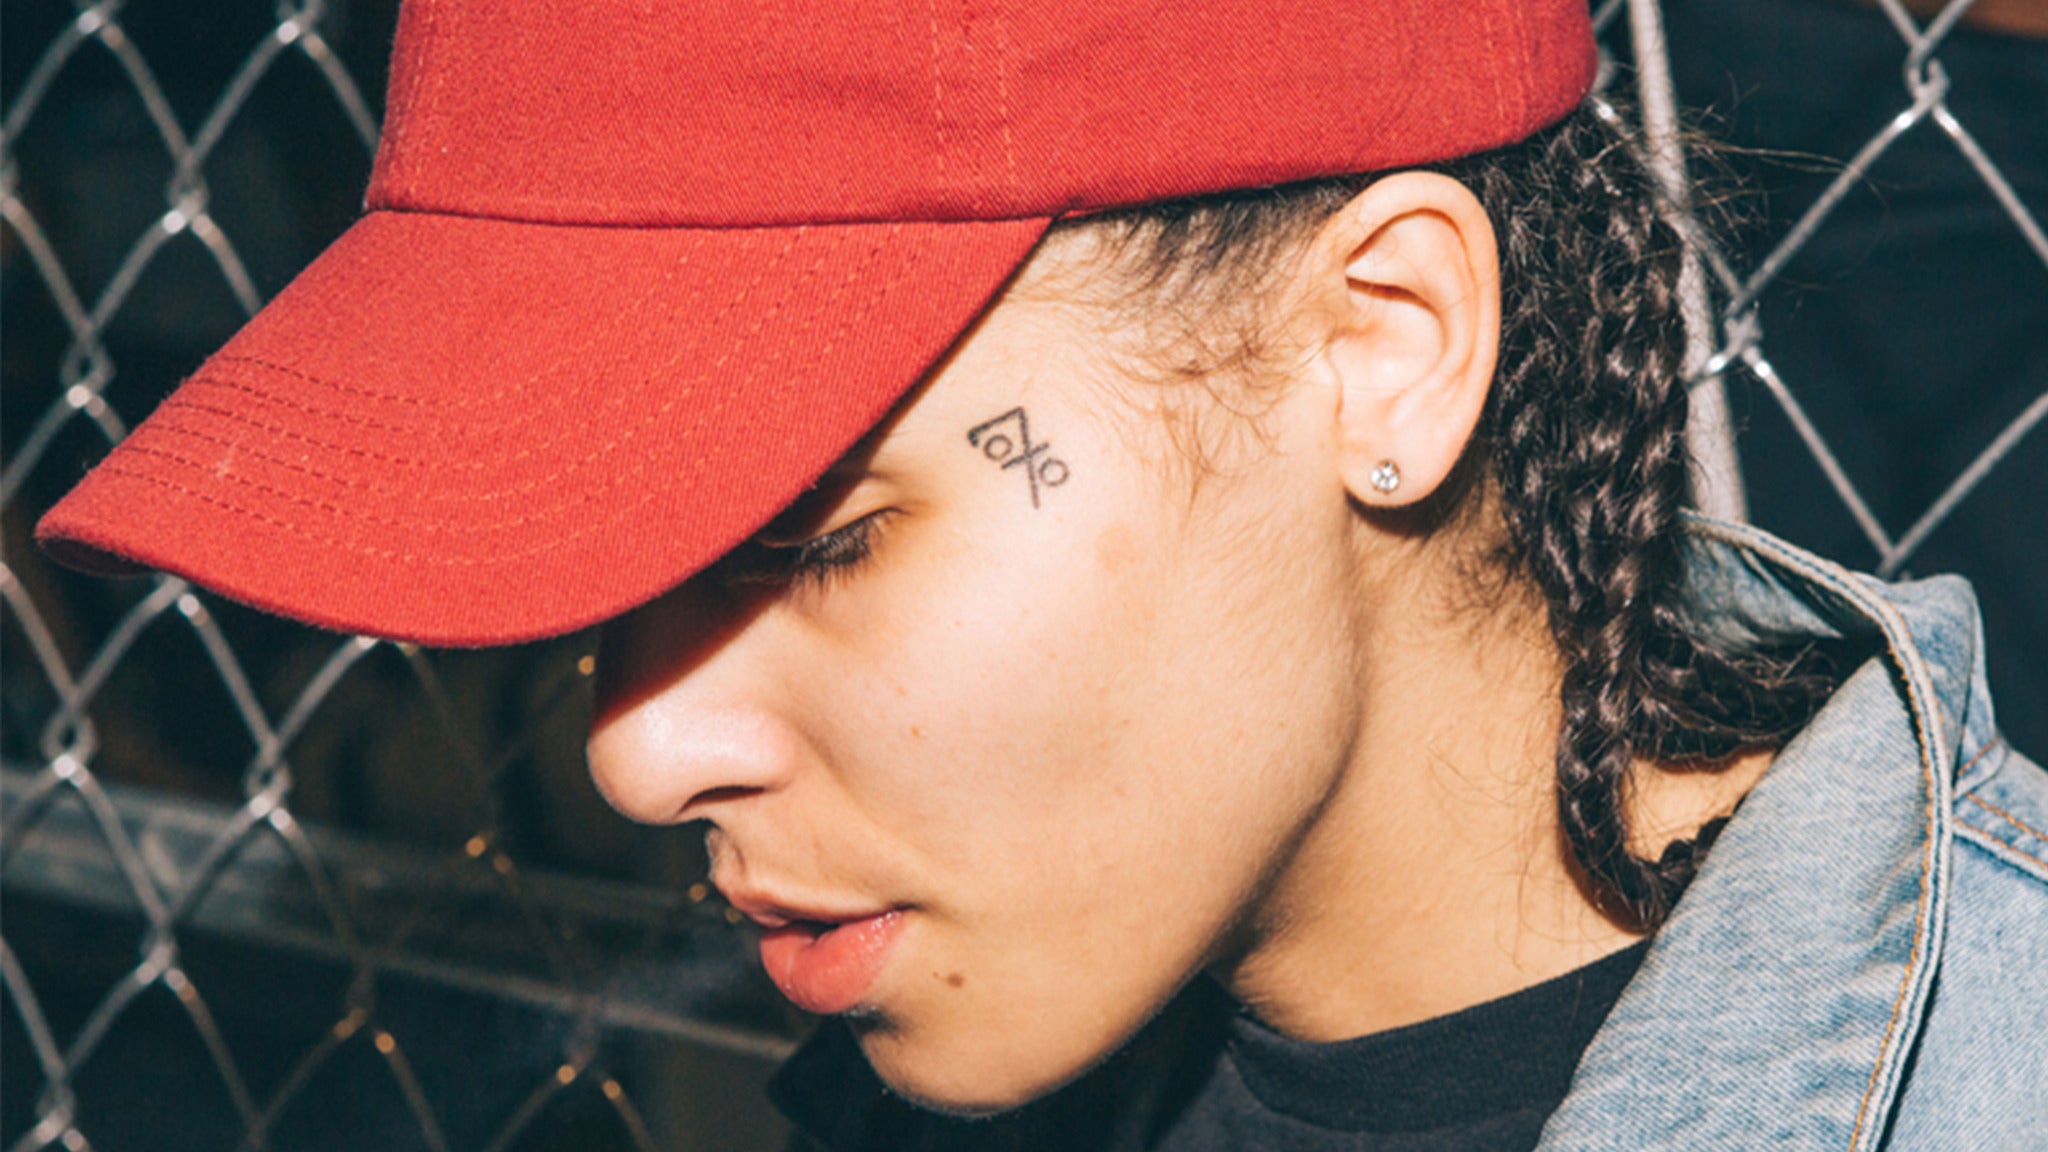 070 Shake Event Title Pic